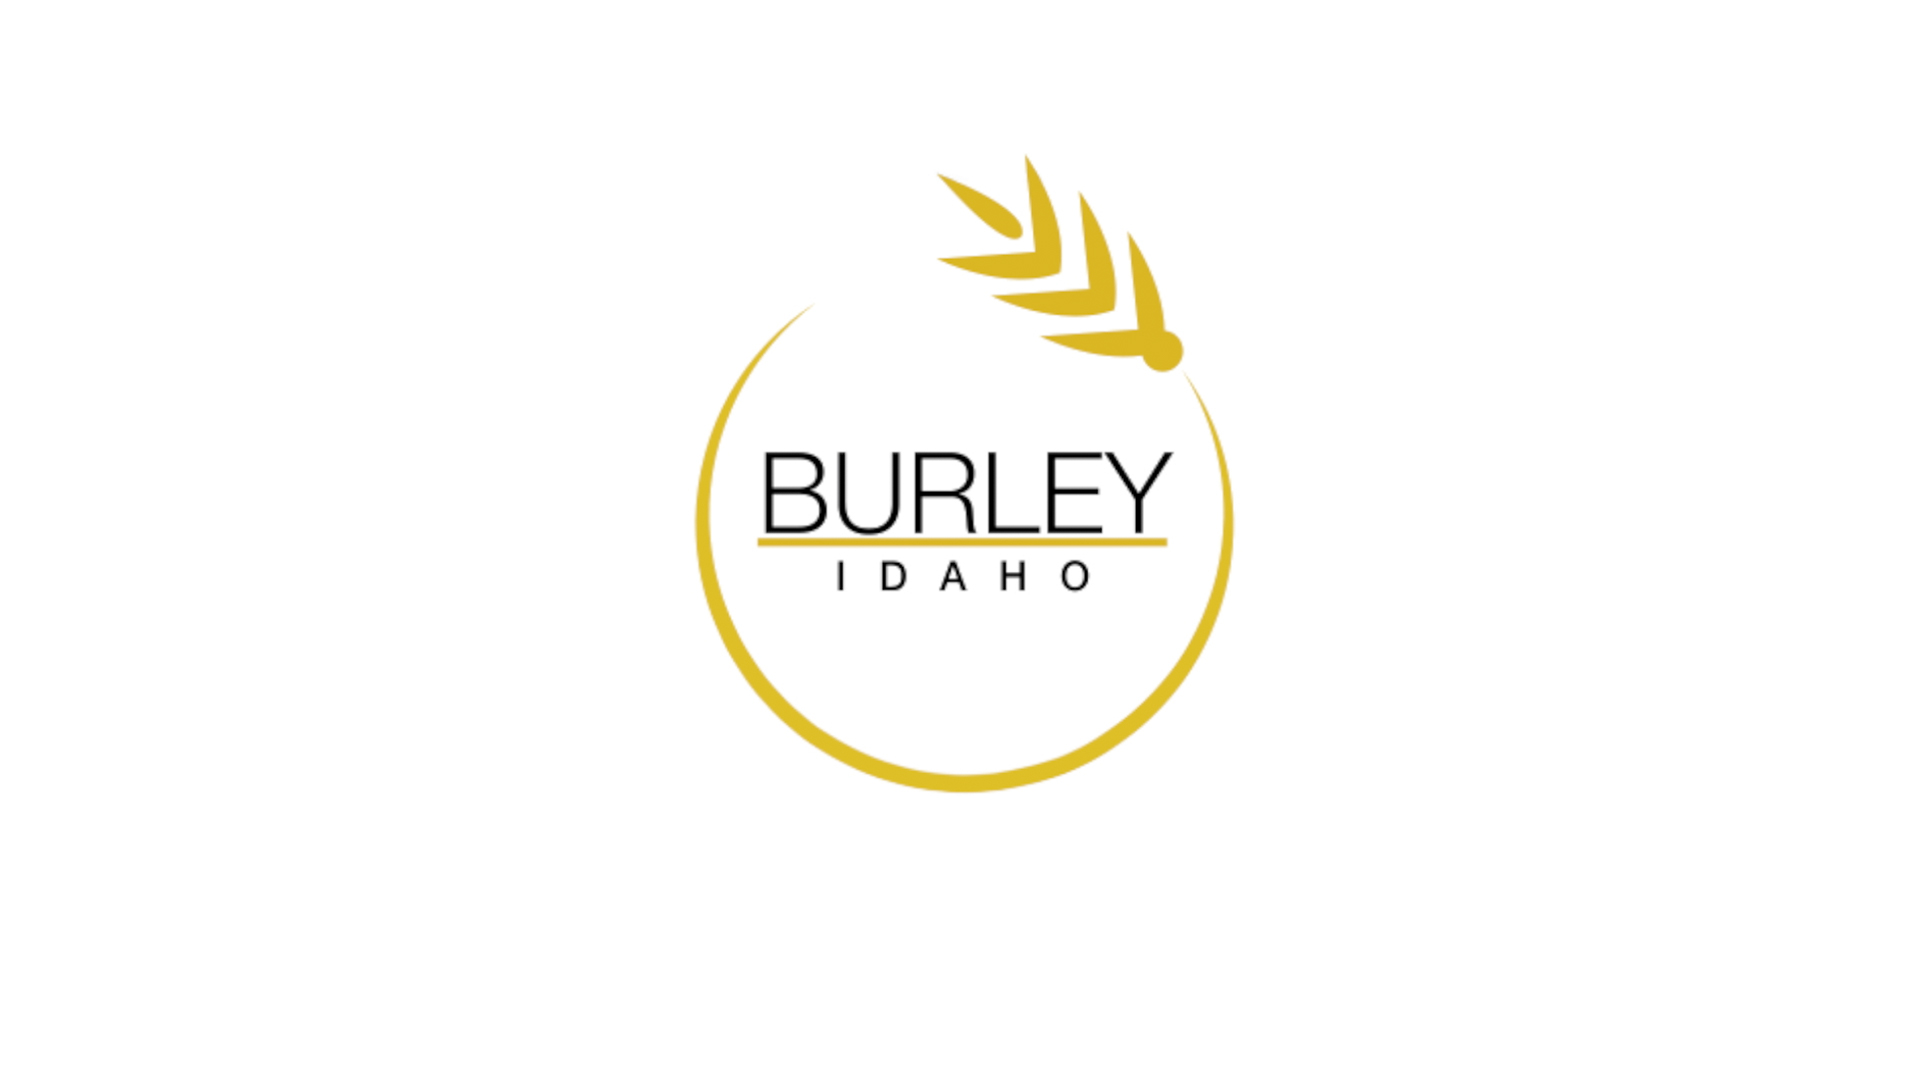 Image for Burley